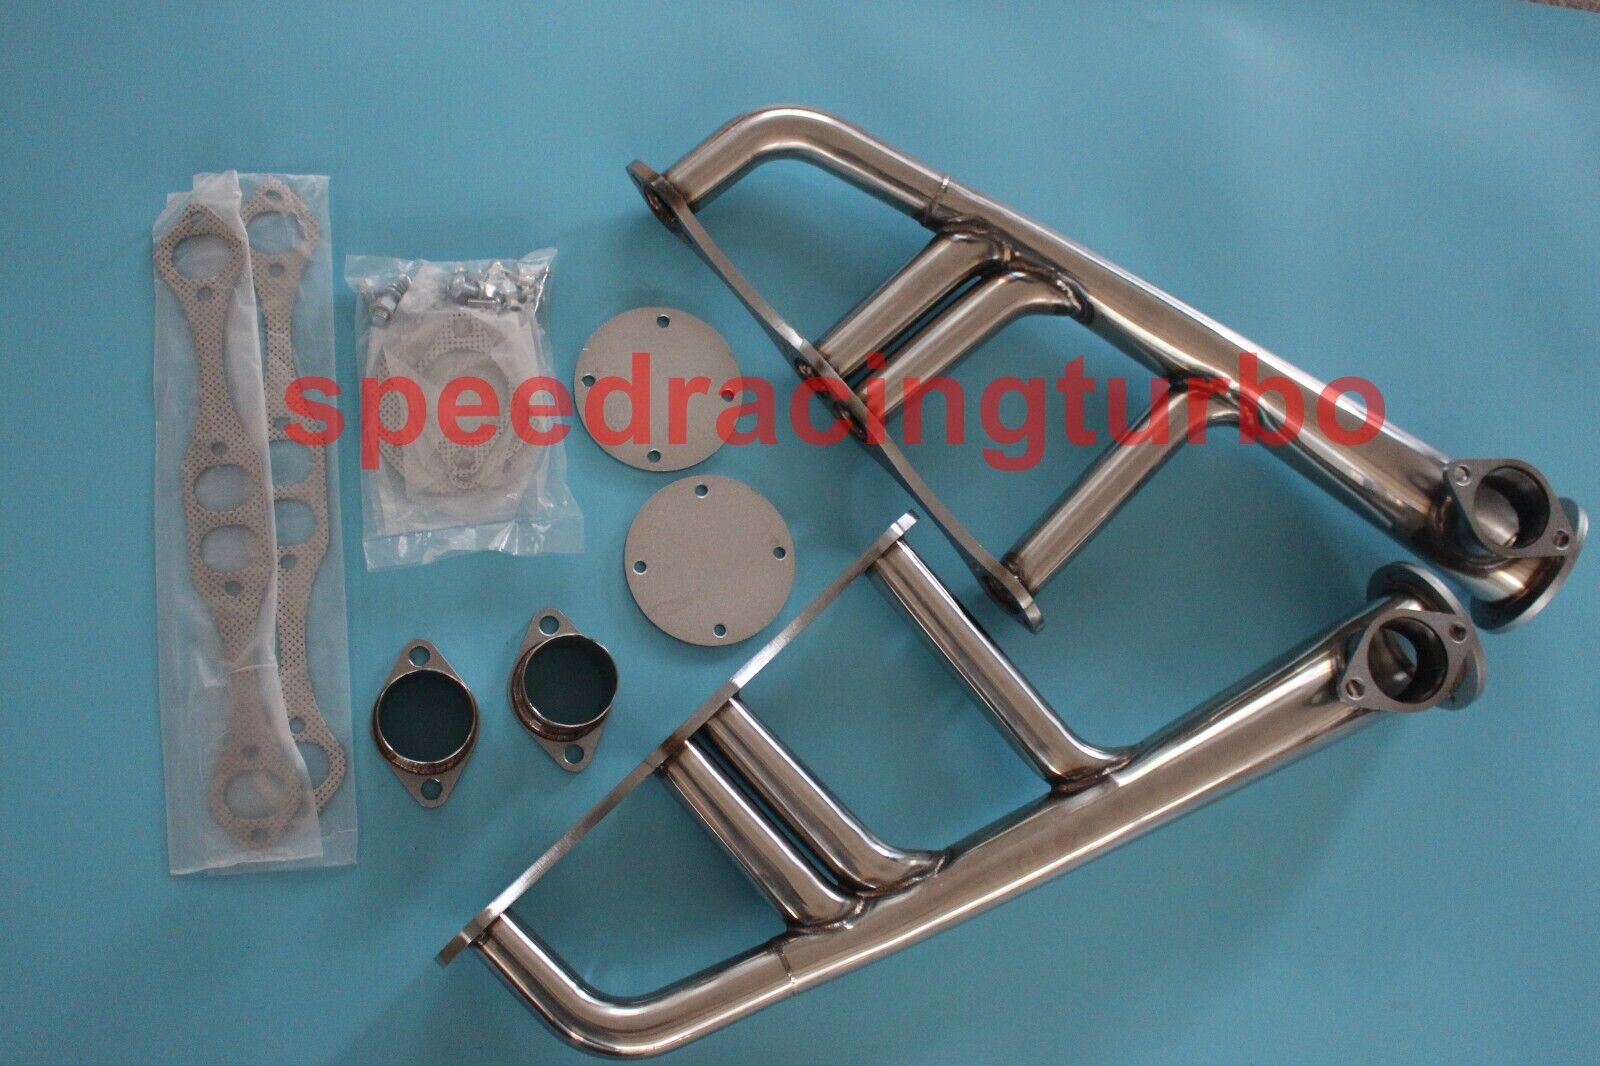 STAINLESS STEEL LAKE STYLE HEADERS FOR SBC 265-400 V8 CHEVY,HOT ROD,STREET,RAT 1